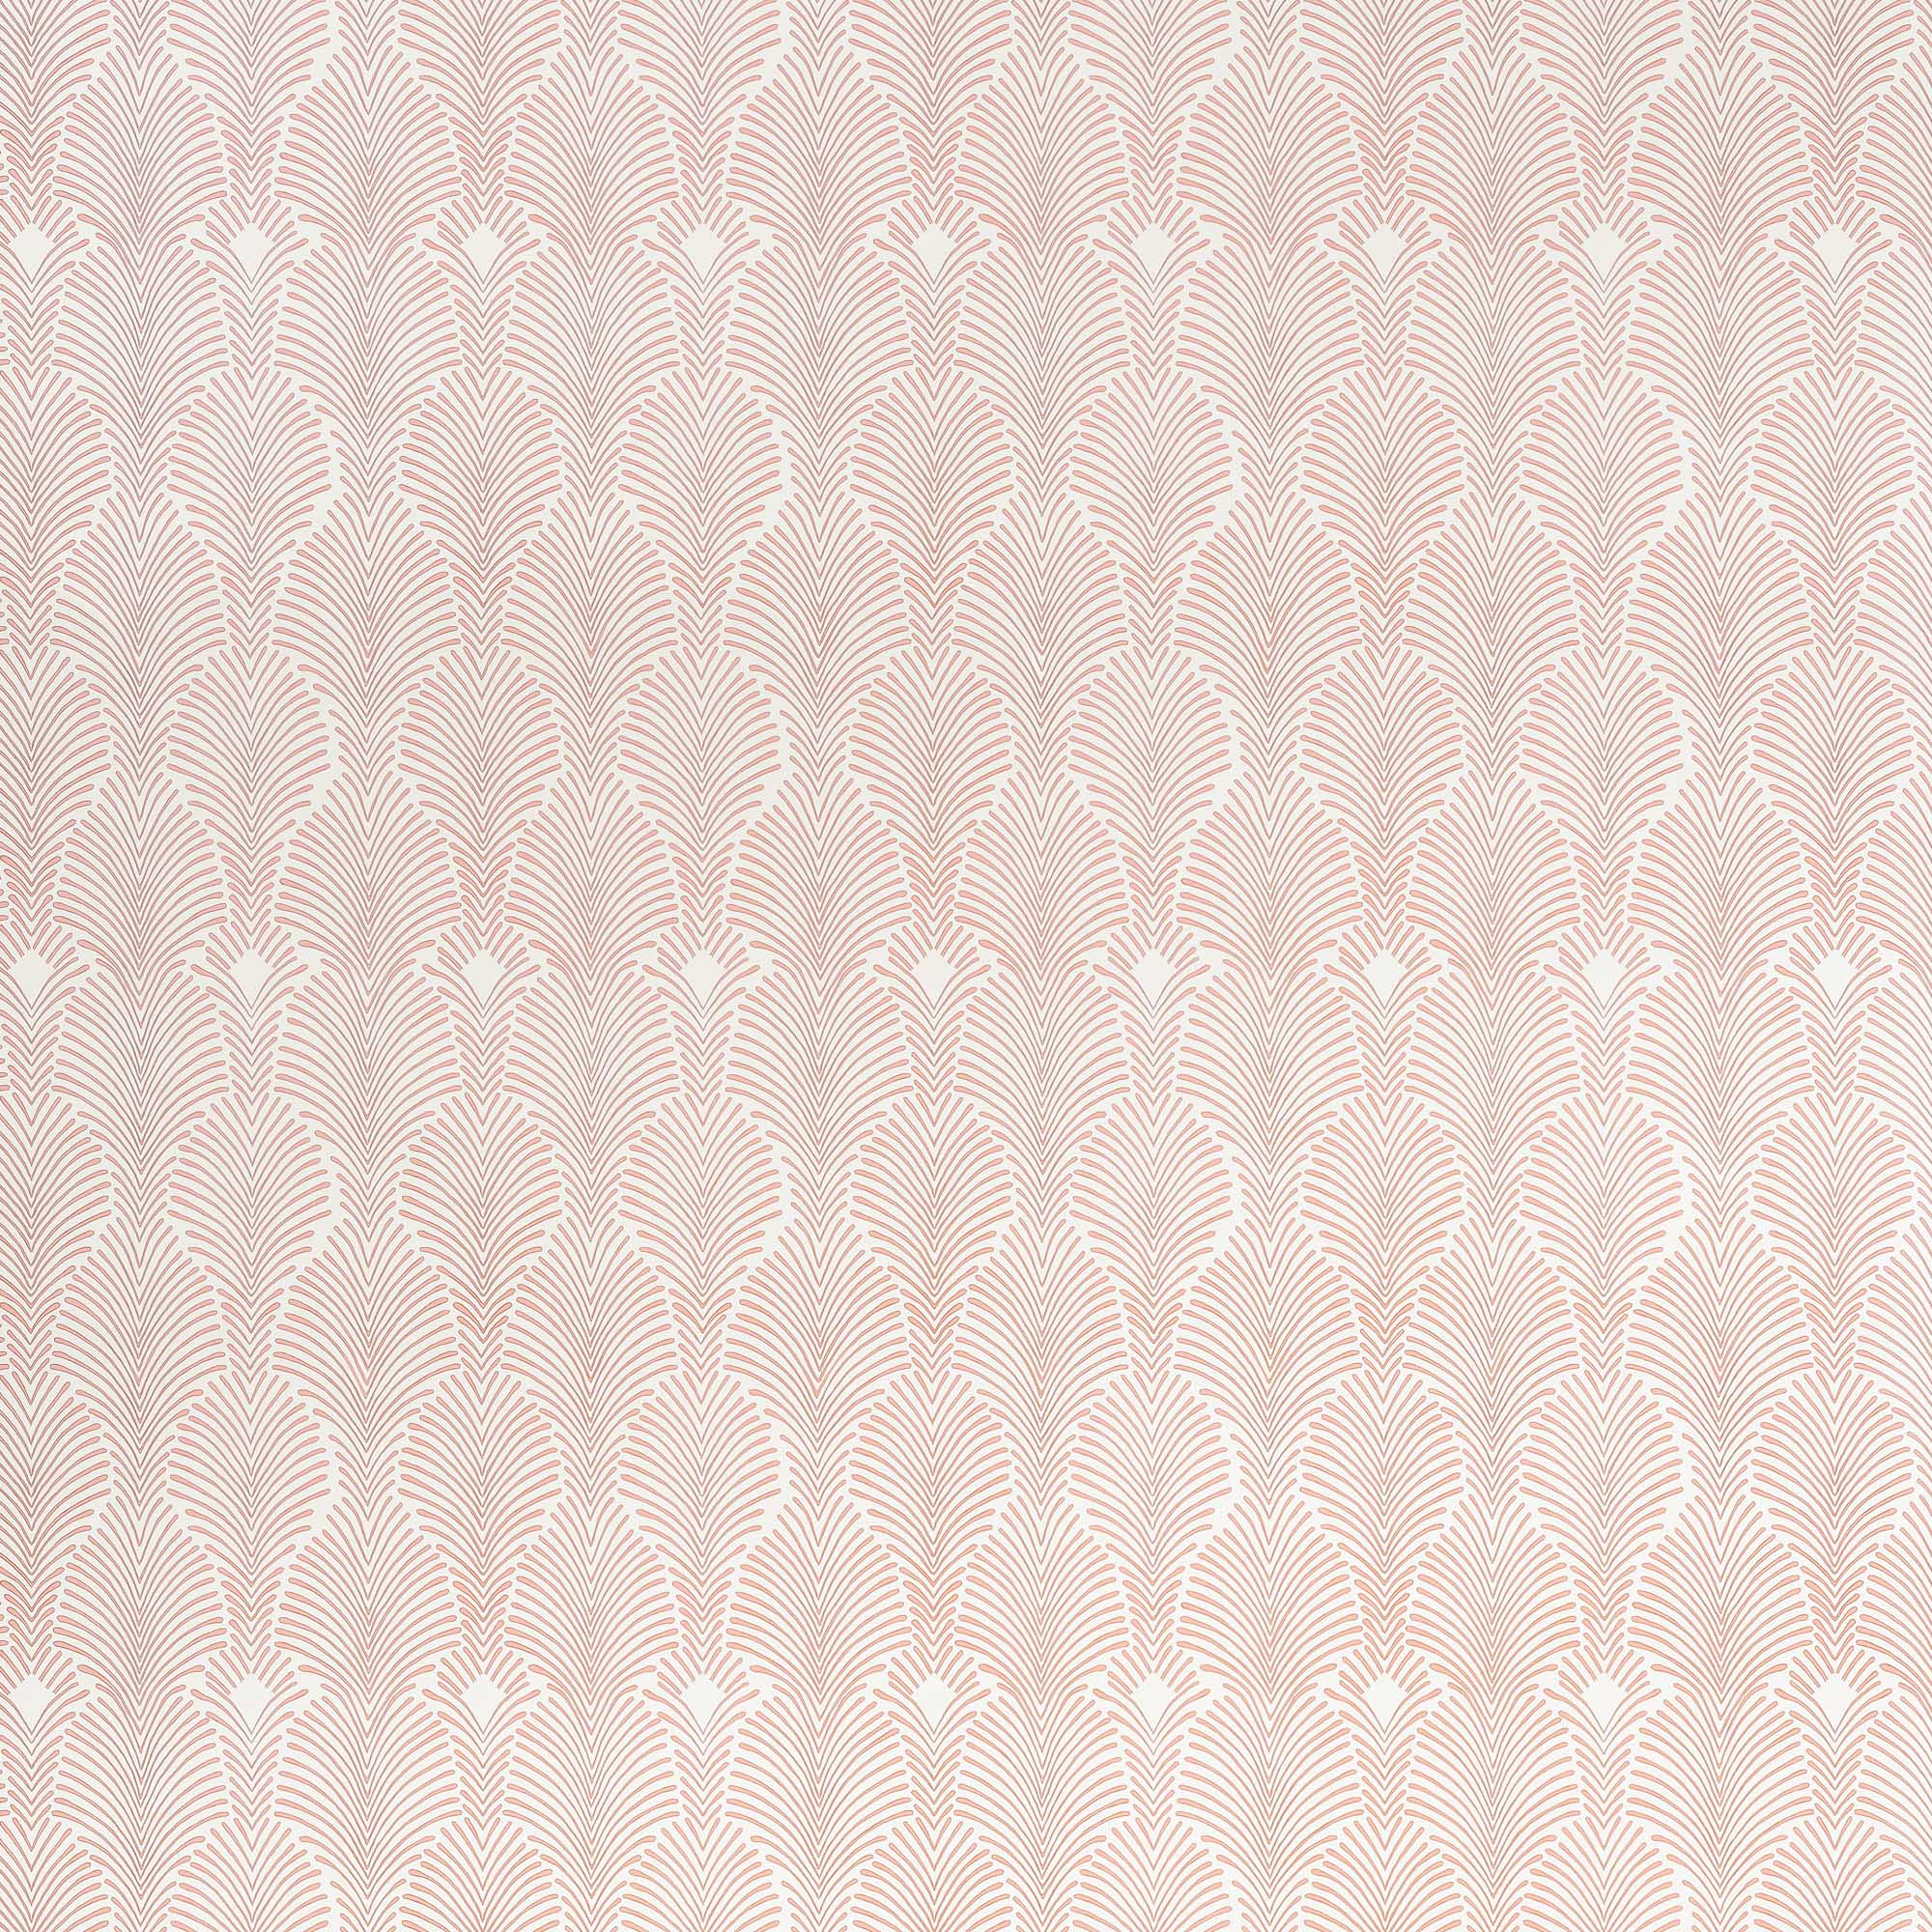 Detail of wallpaper in an art deco damask print in dusty rose on a white field.